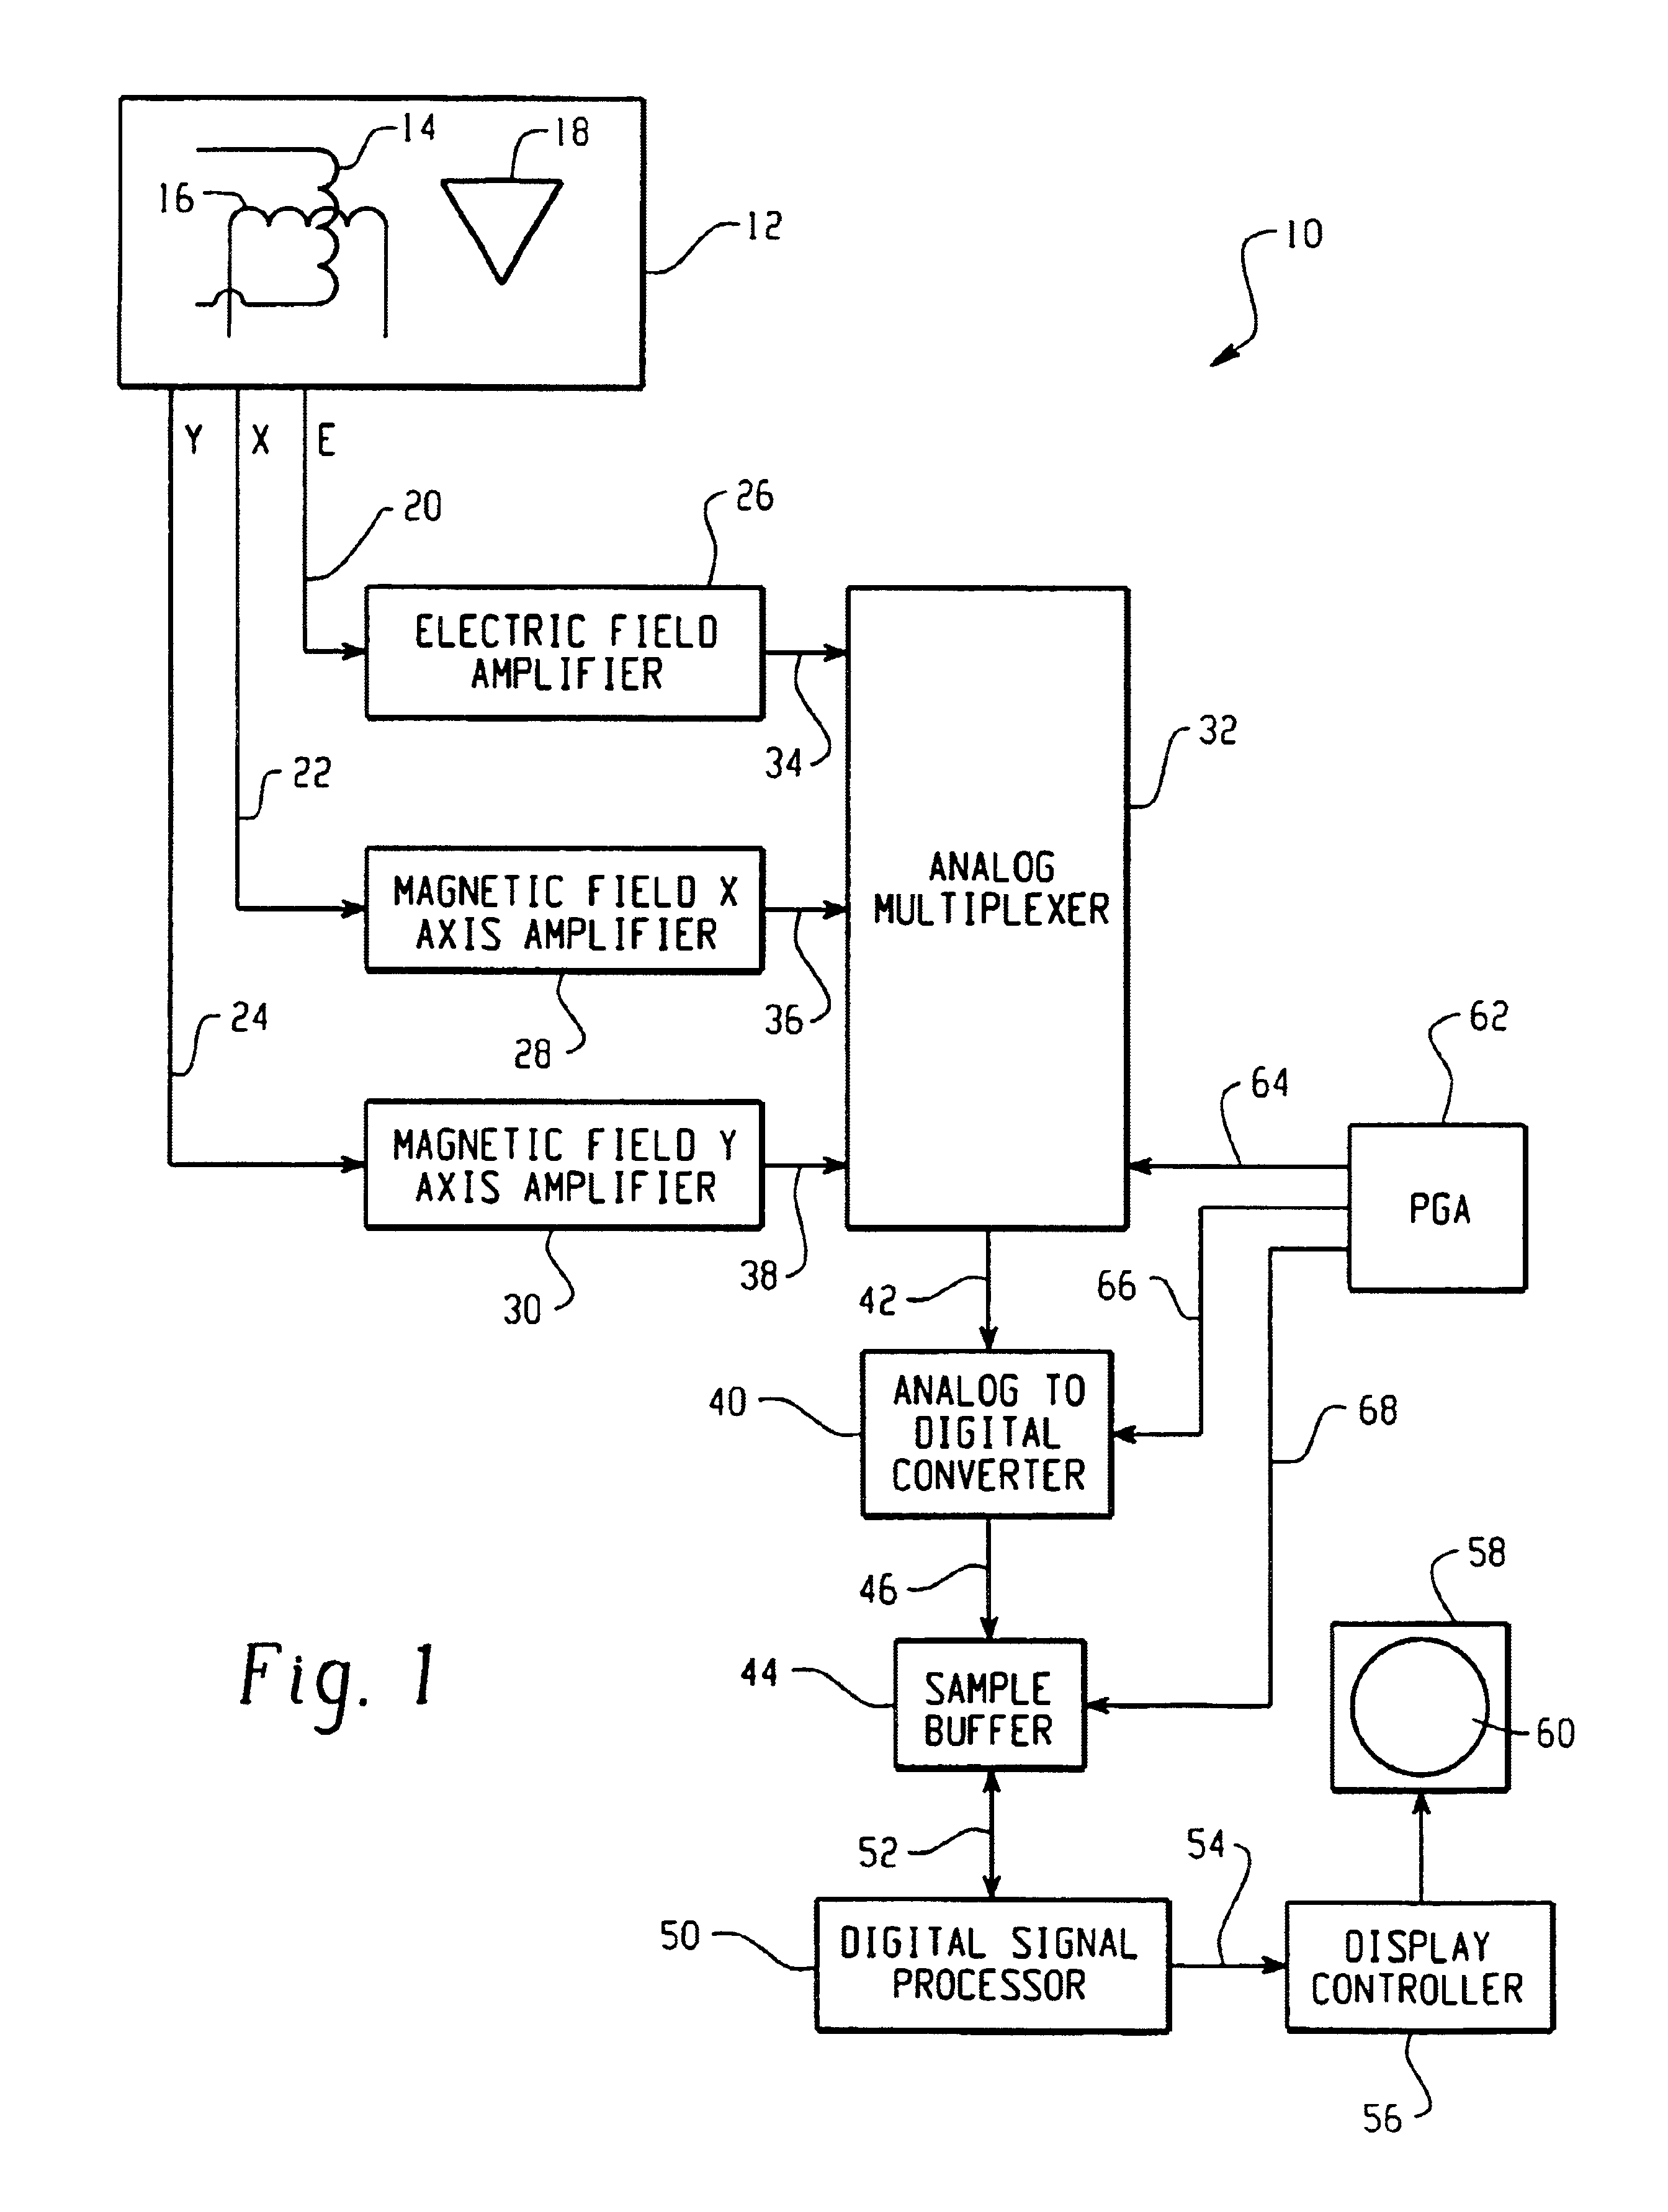 Passive clear air turbulence detection avionics system and method